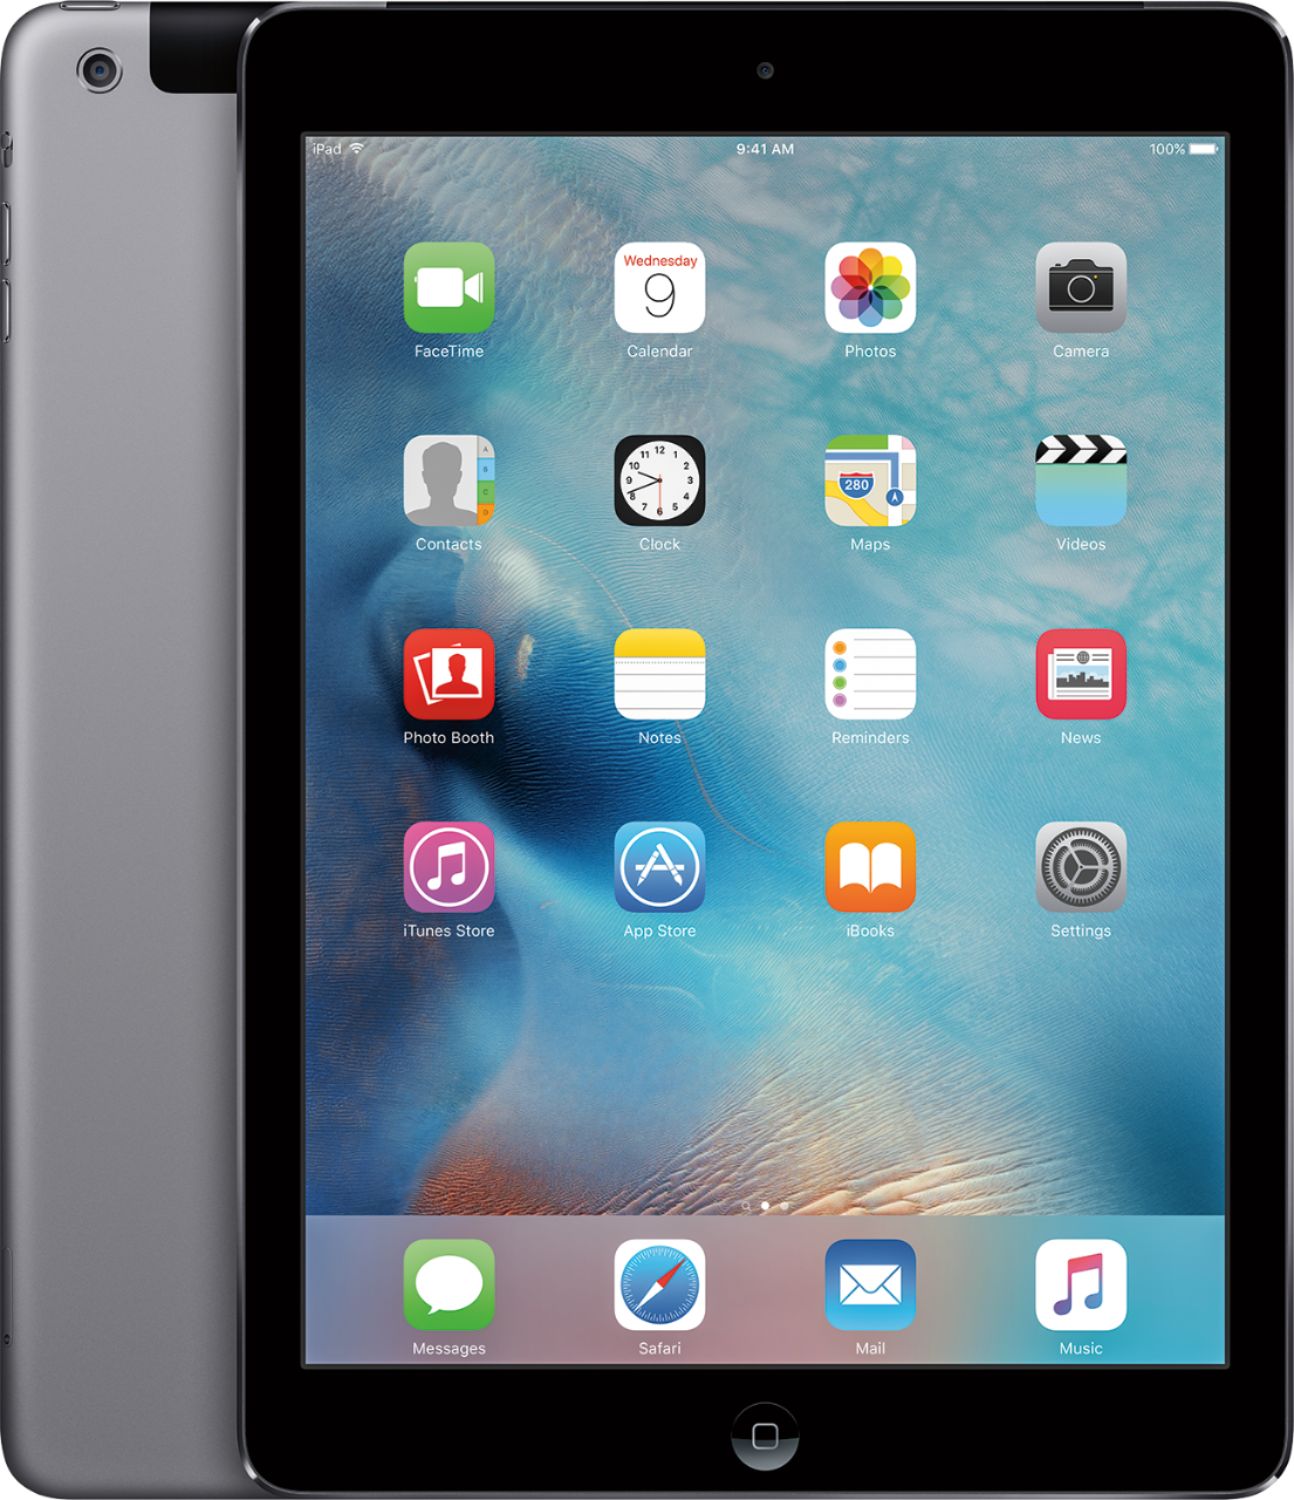 Apple iPad® Air with Wi-Fi 16GB Space Gray MD785LL/A - Best Buy